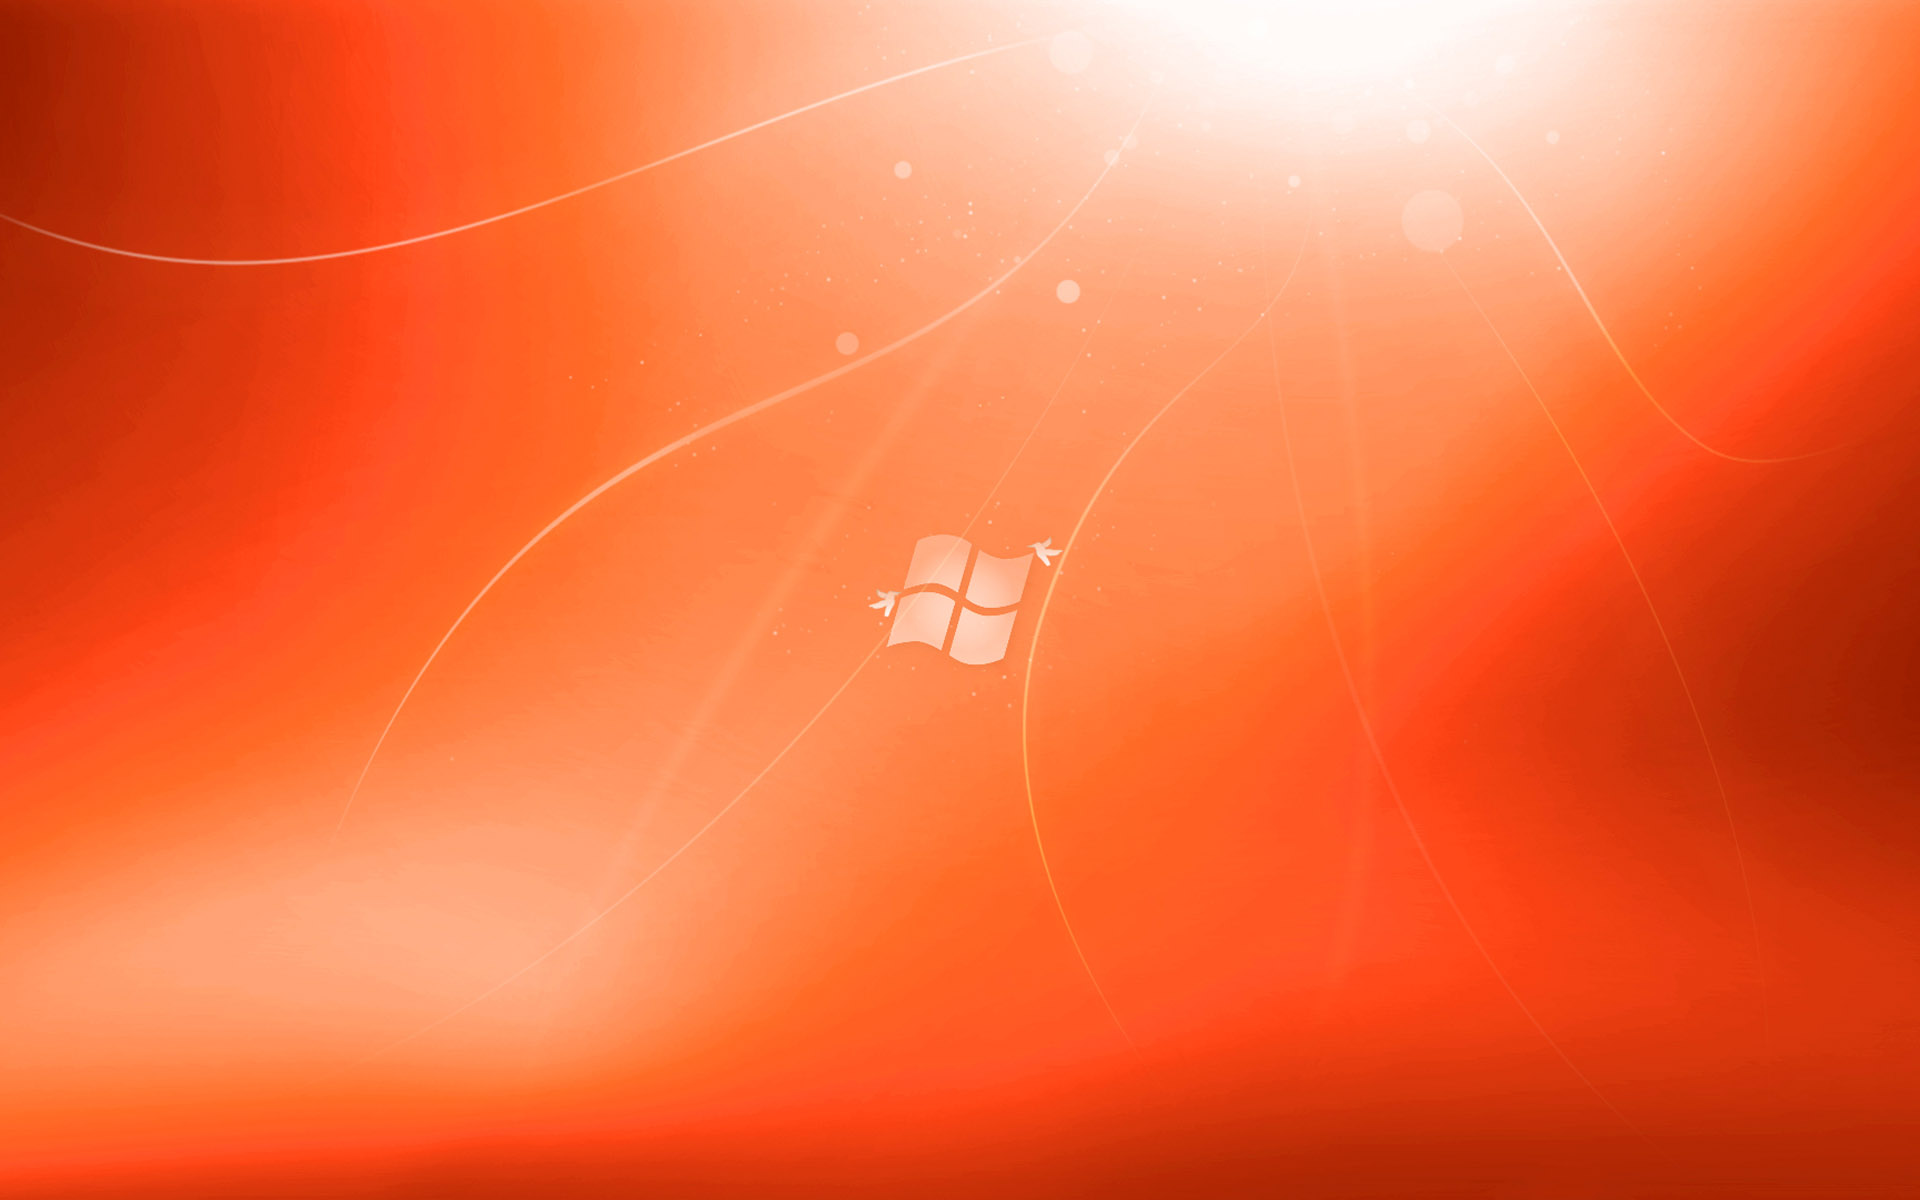 Really Amazing Windows Wallpaper For Your Brand New